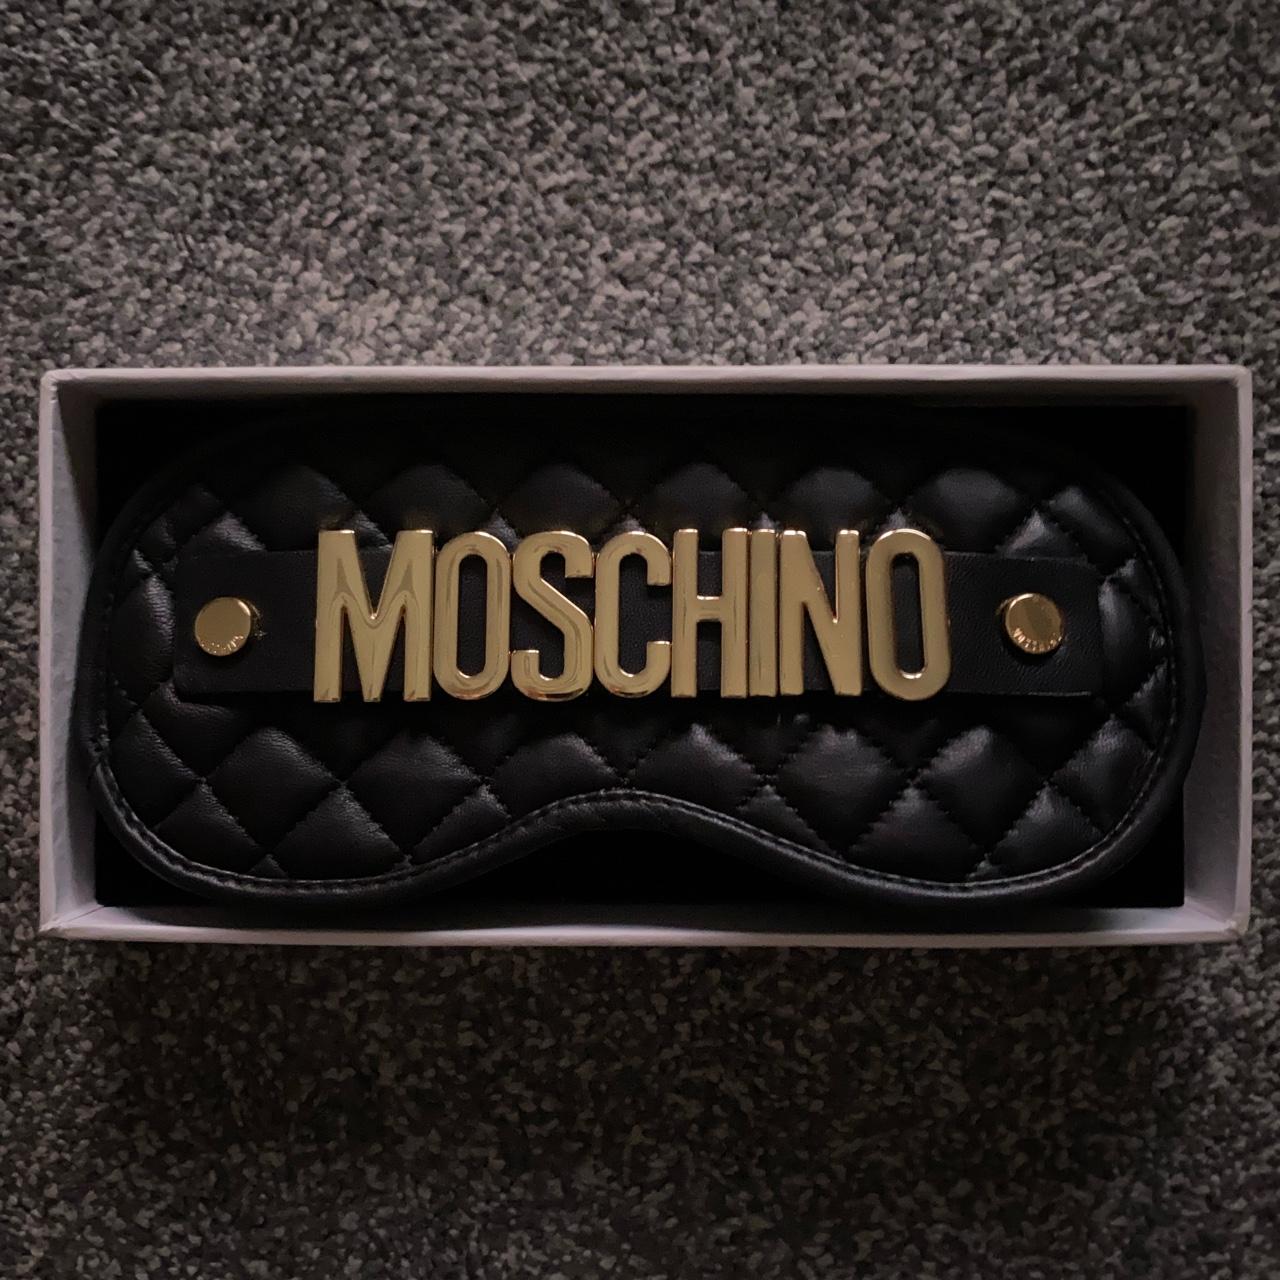 Moschino H&M sleeping mask 💤 Deadstock limited...